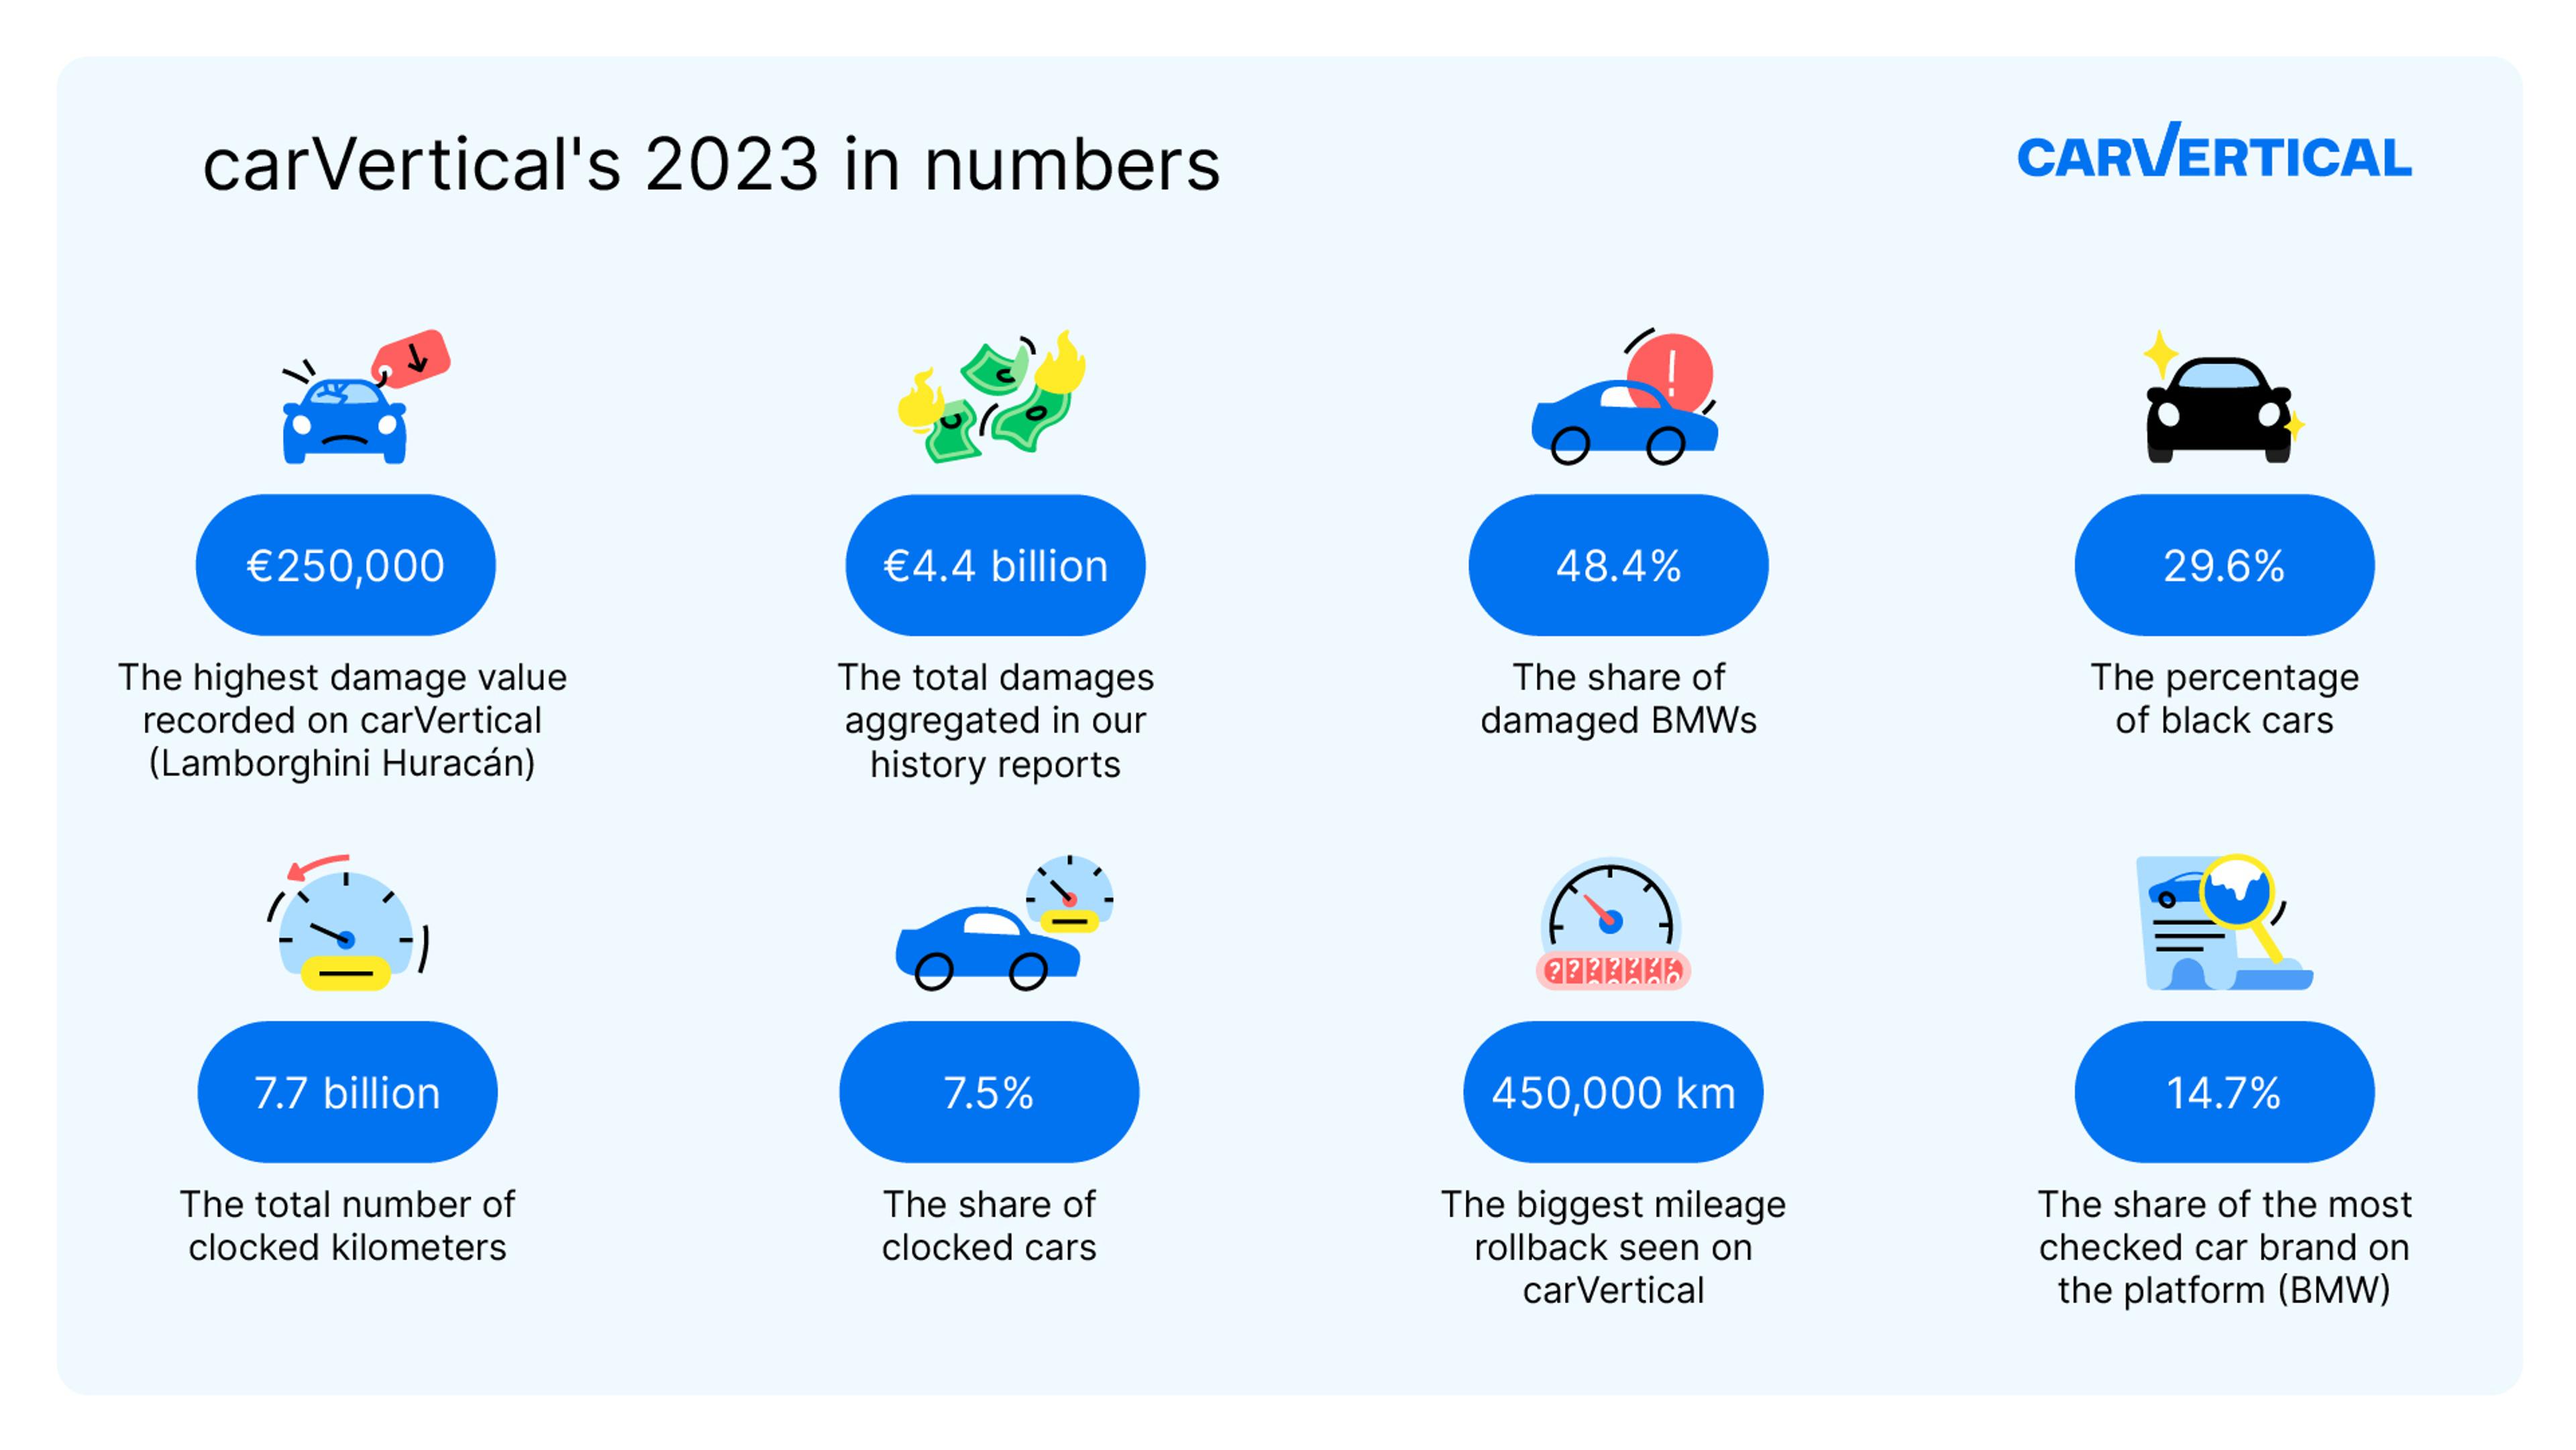 carVertical's 2023 in numbers